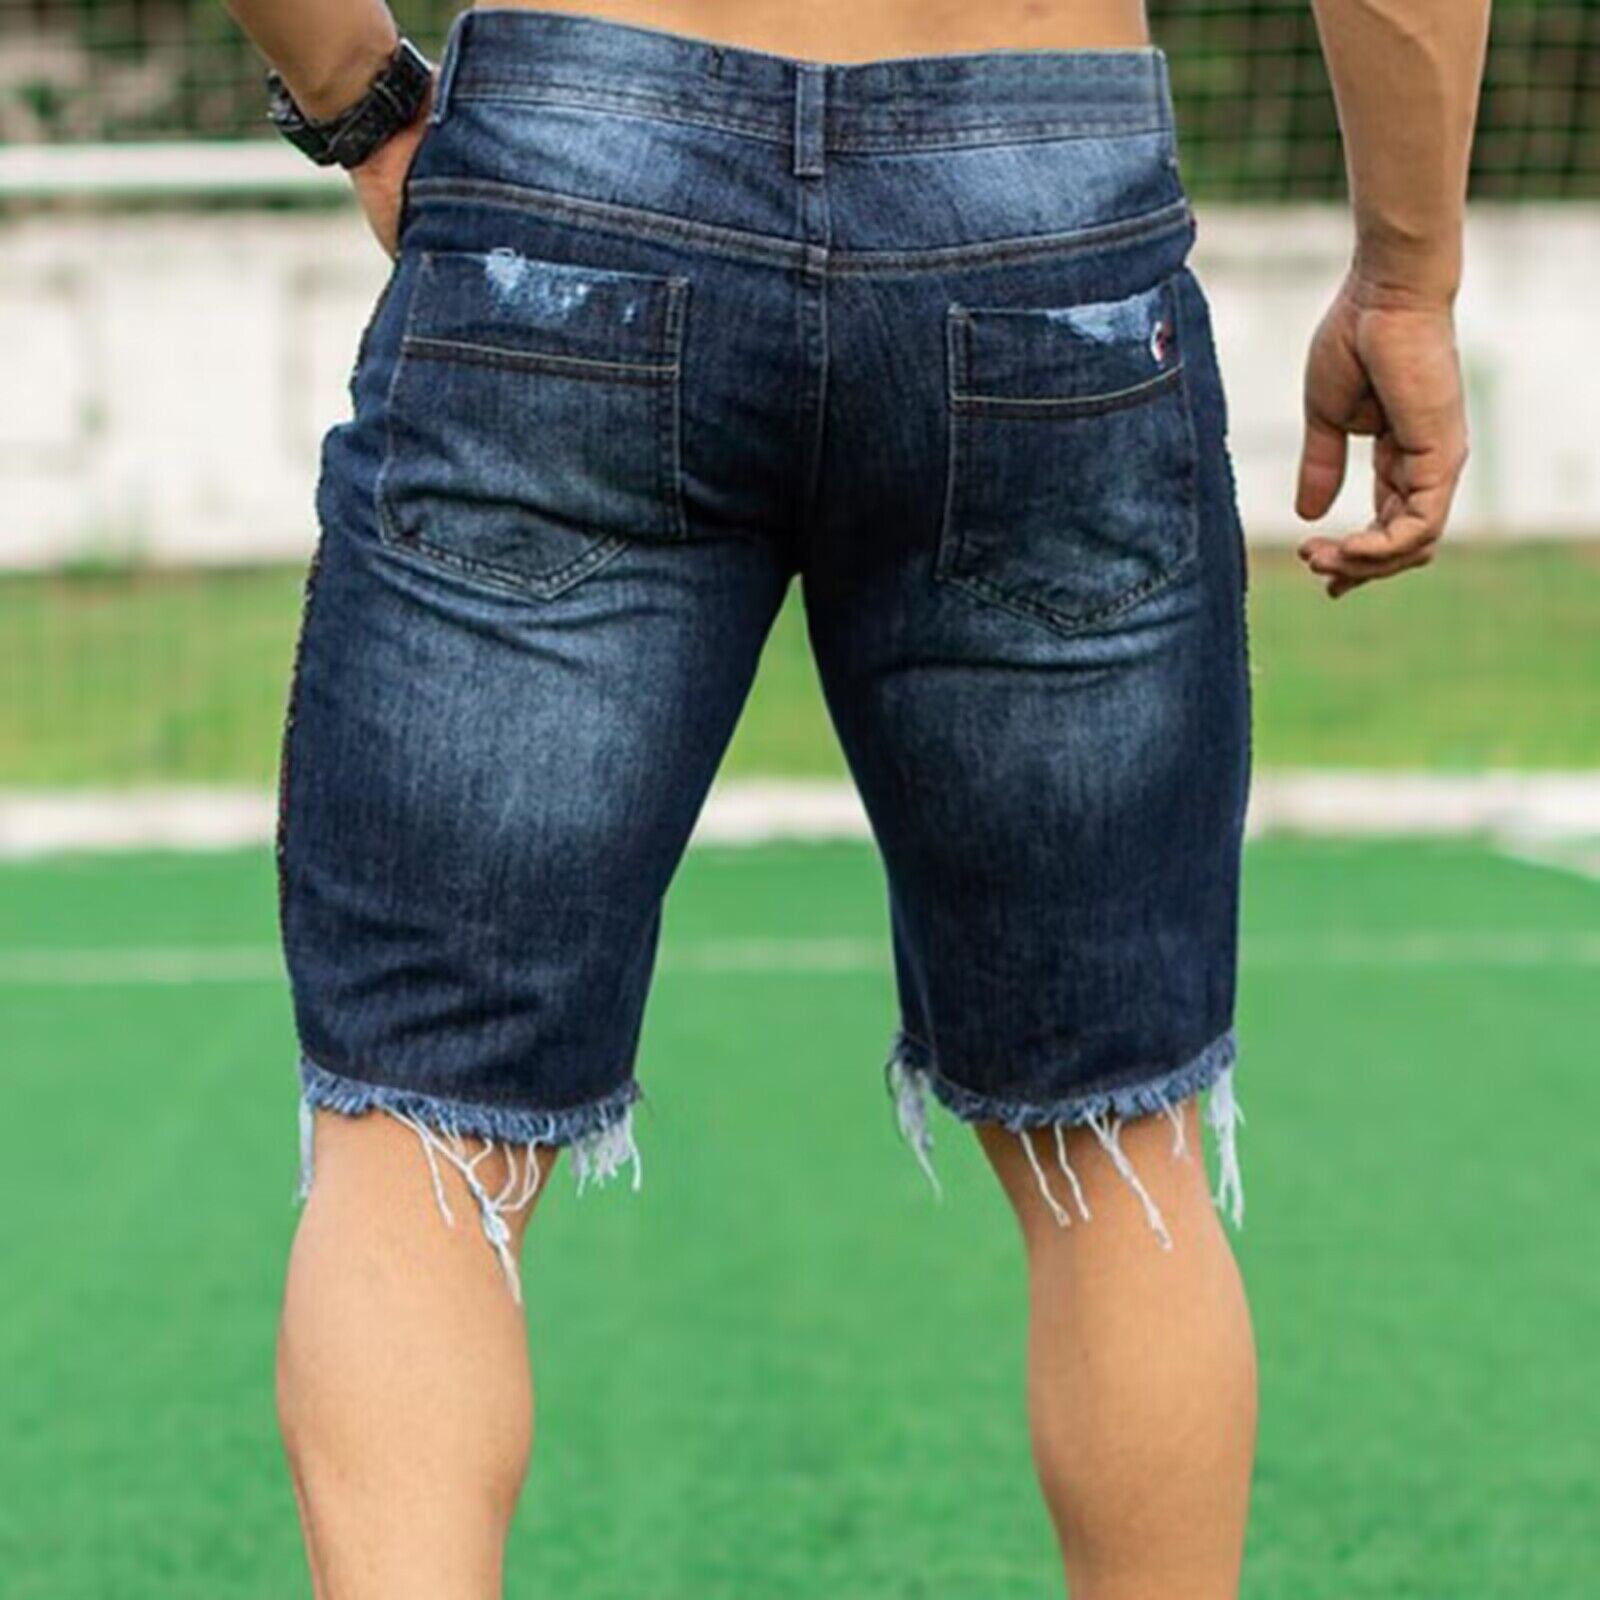 New Men Strap Jeans Mens Denim Shorts Fashion Romper Torn Jeans Suspender  Pants Large Size S 3XL Knee Length Overalls Newest From Bikini_trade,  $34.52 | DHgate.Com